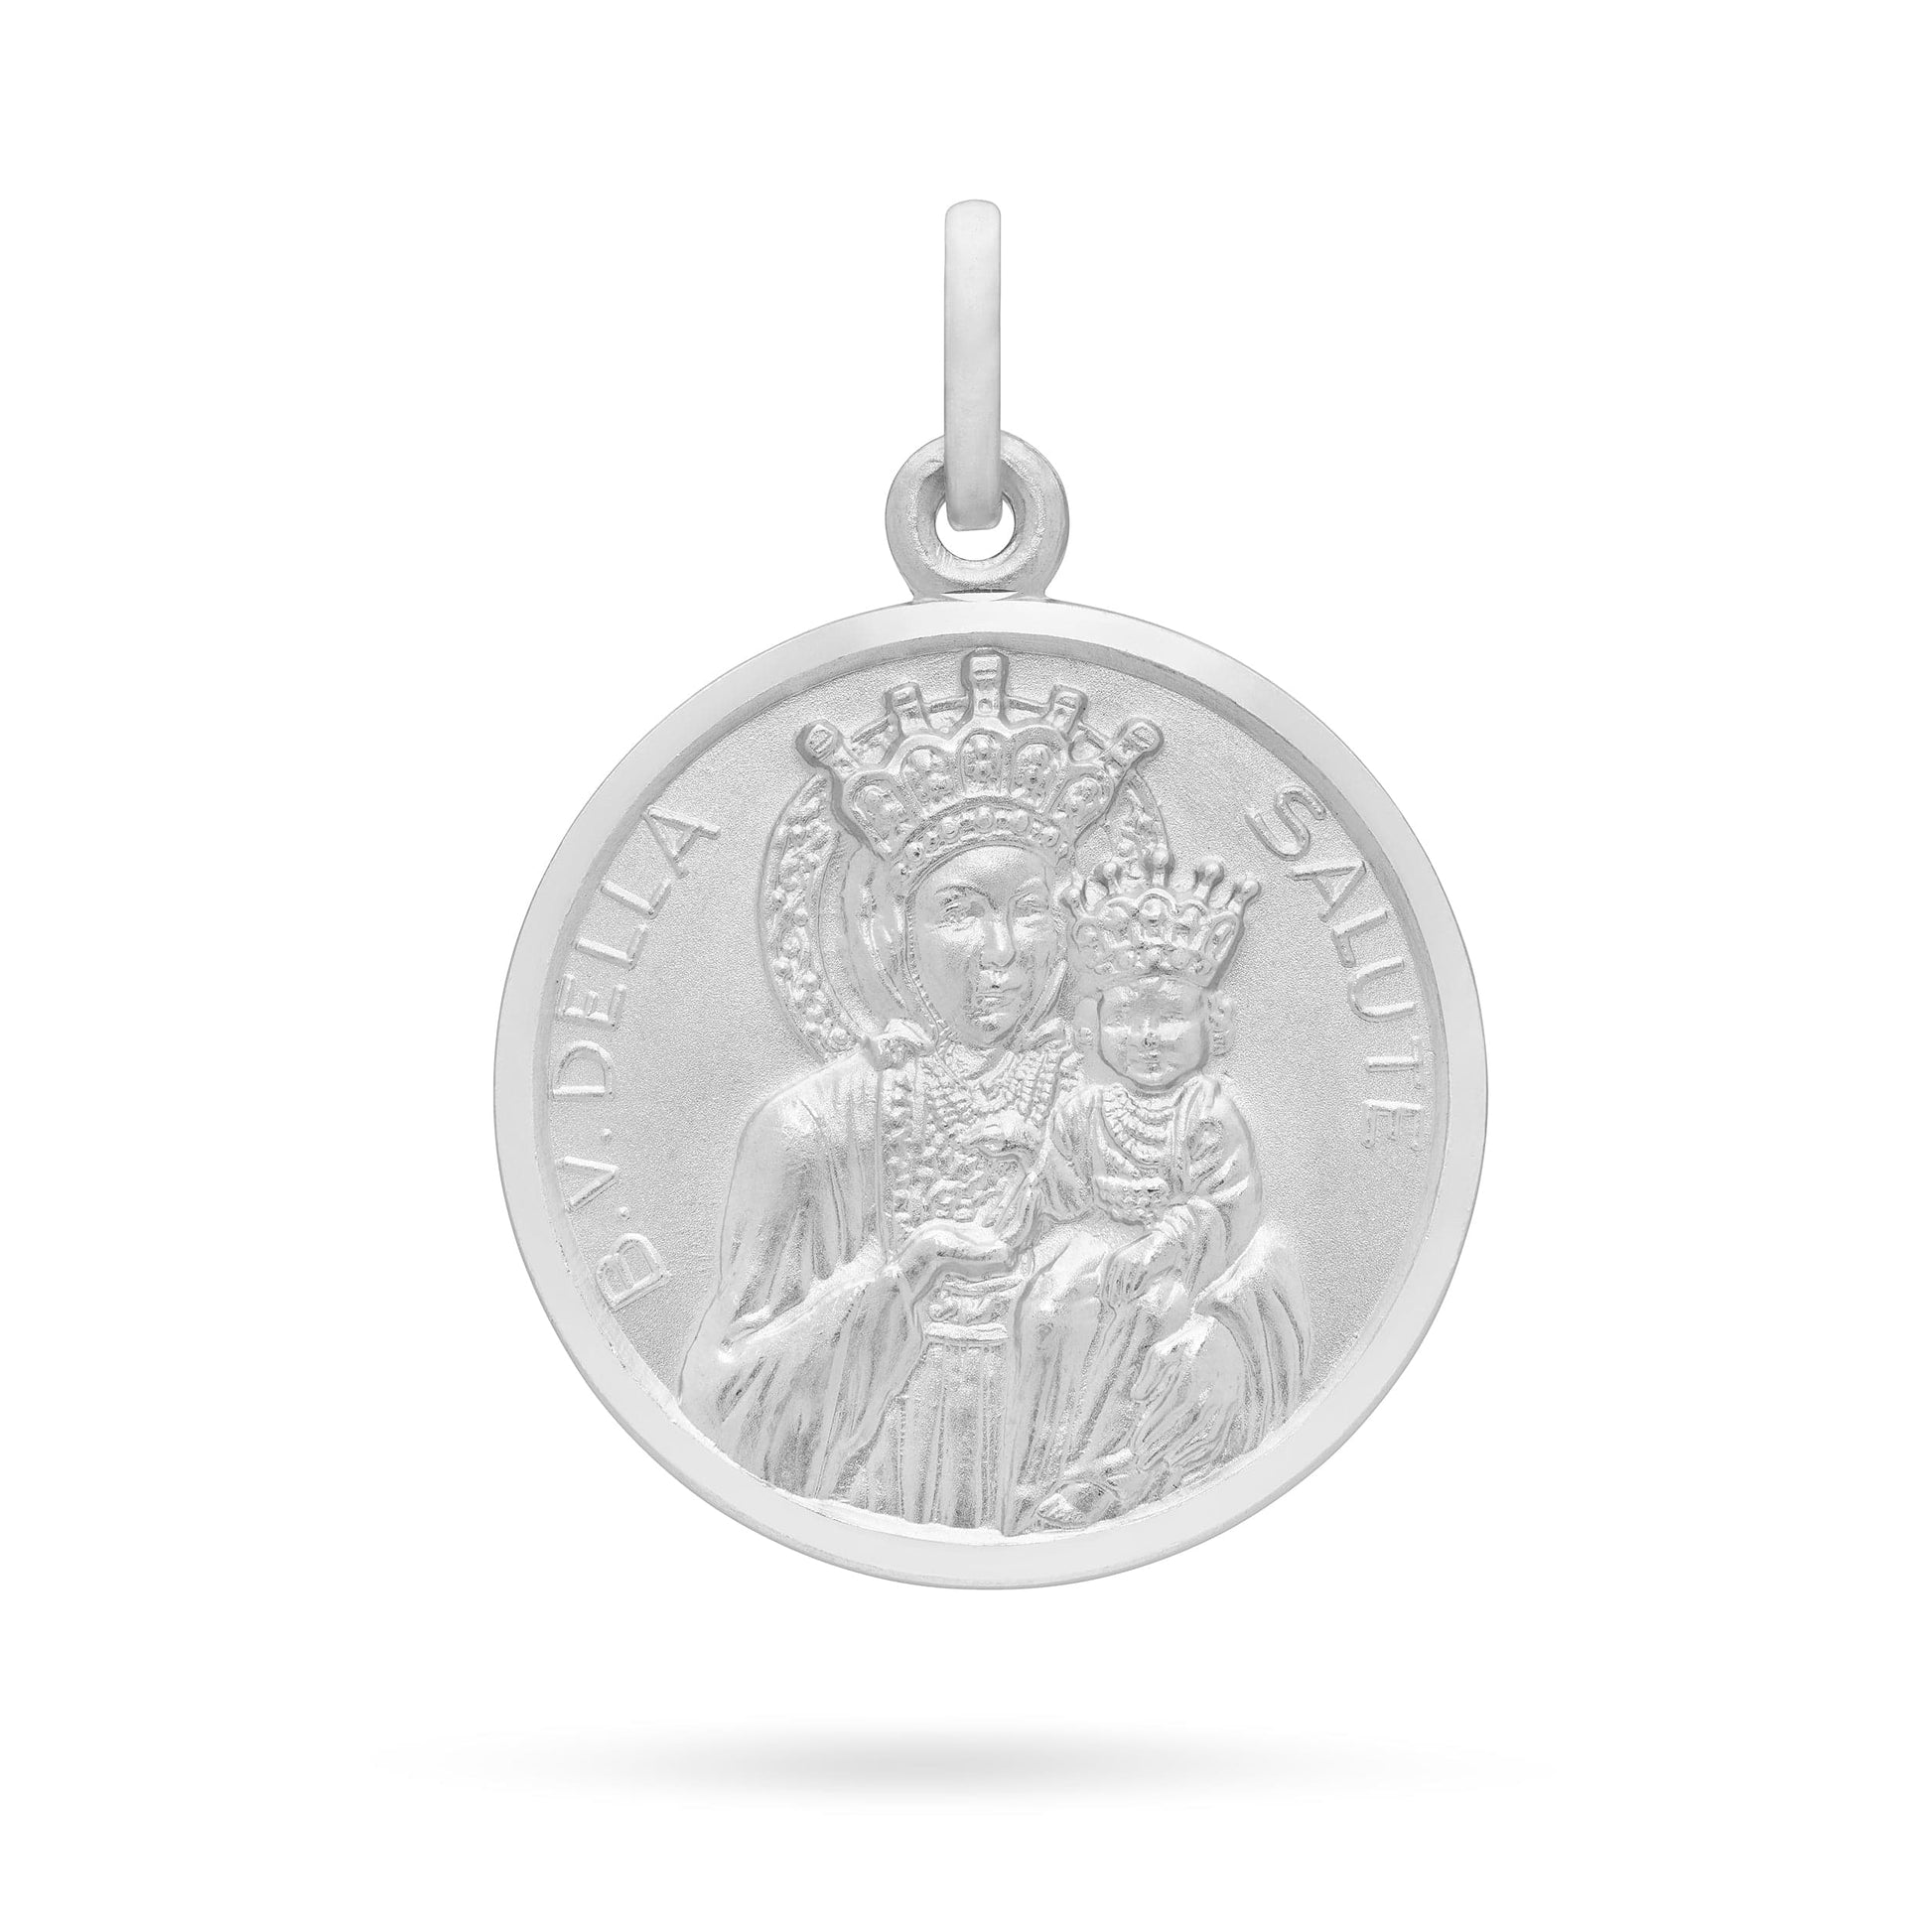 MONDO CATTOLICO Medal Silver medal of Our Lady of Good Health